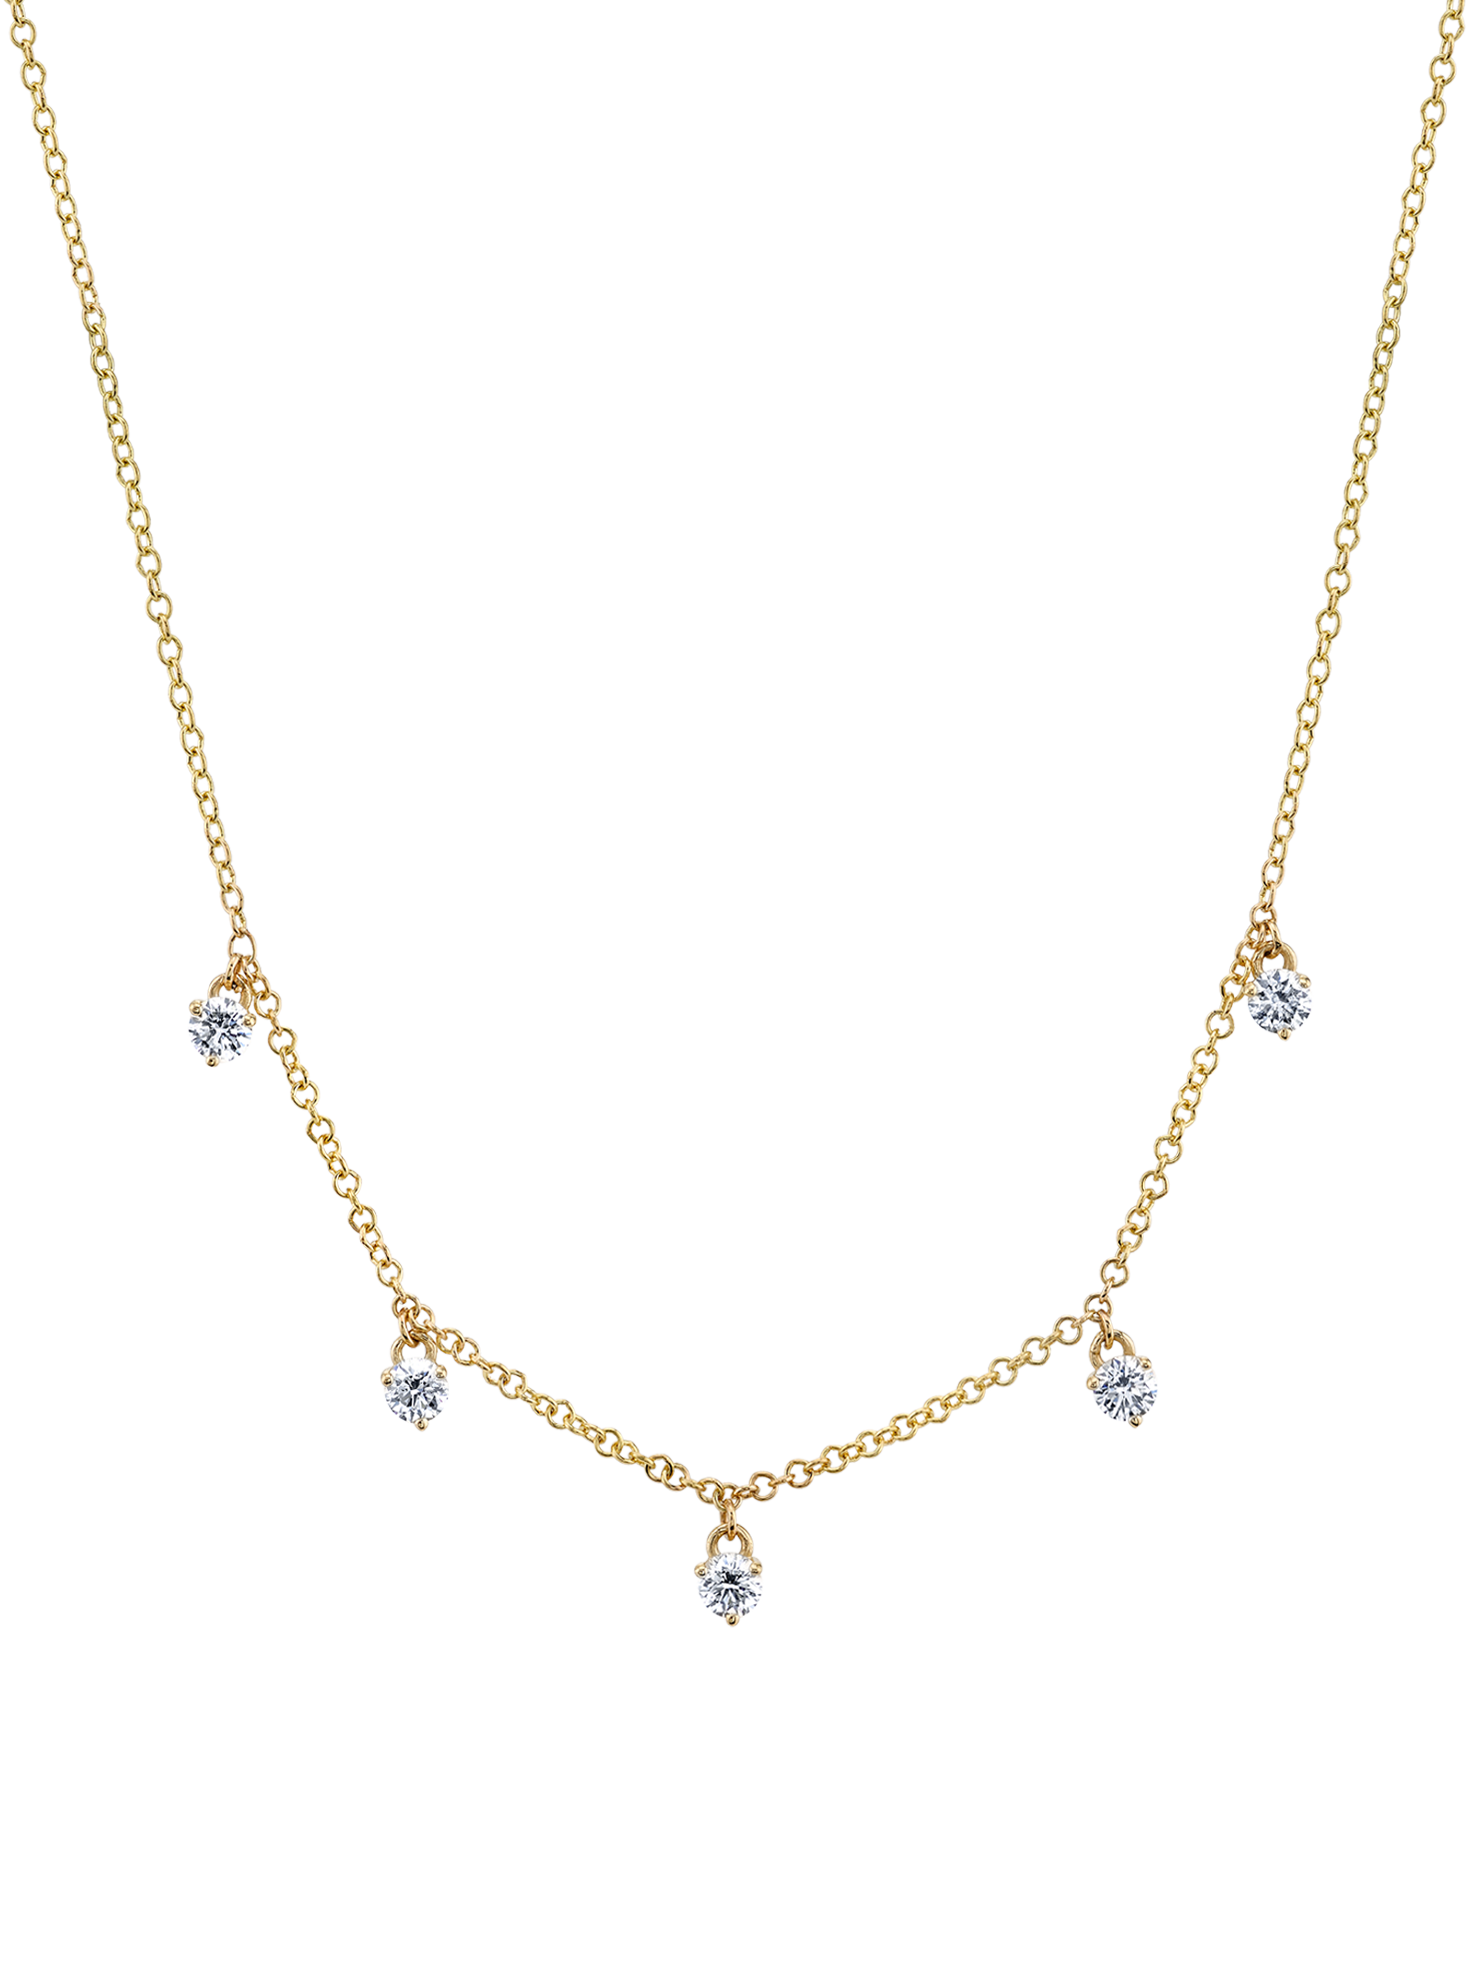 Five Solitaire Necklace - White Diamond / 14k Yellow Gold – The Last Line